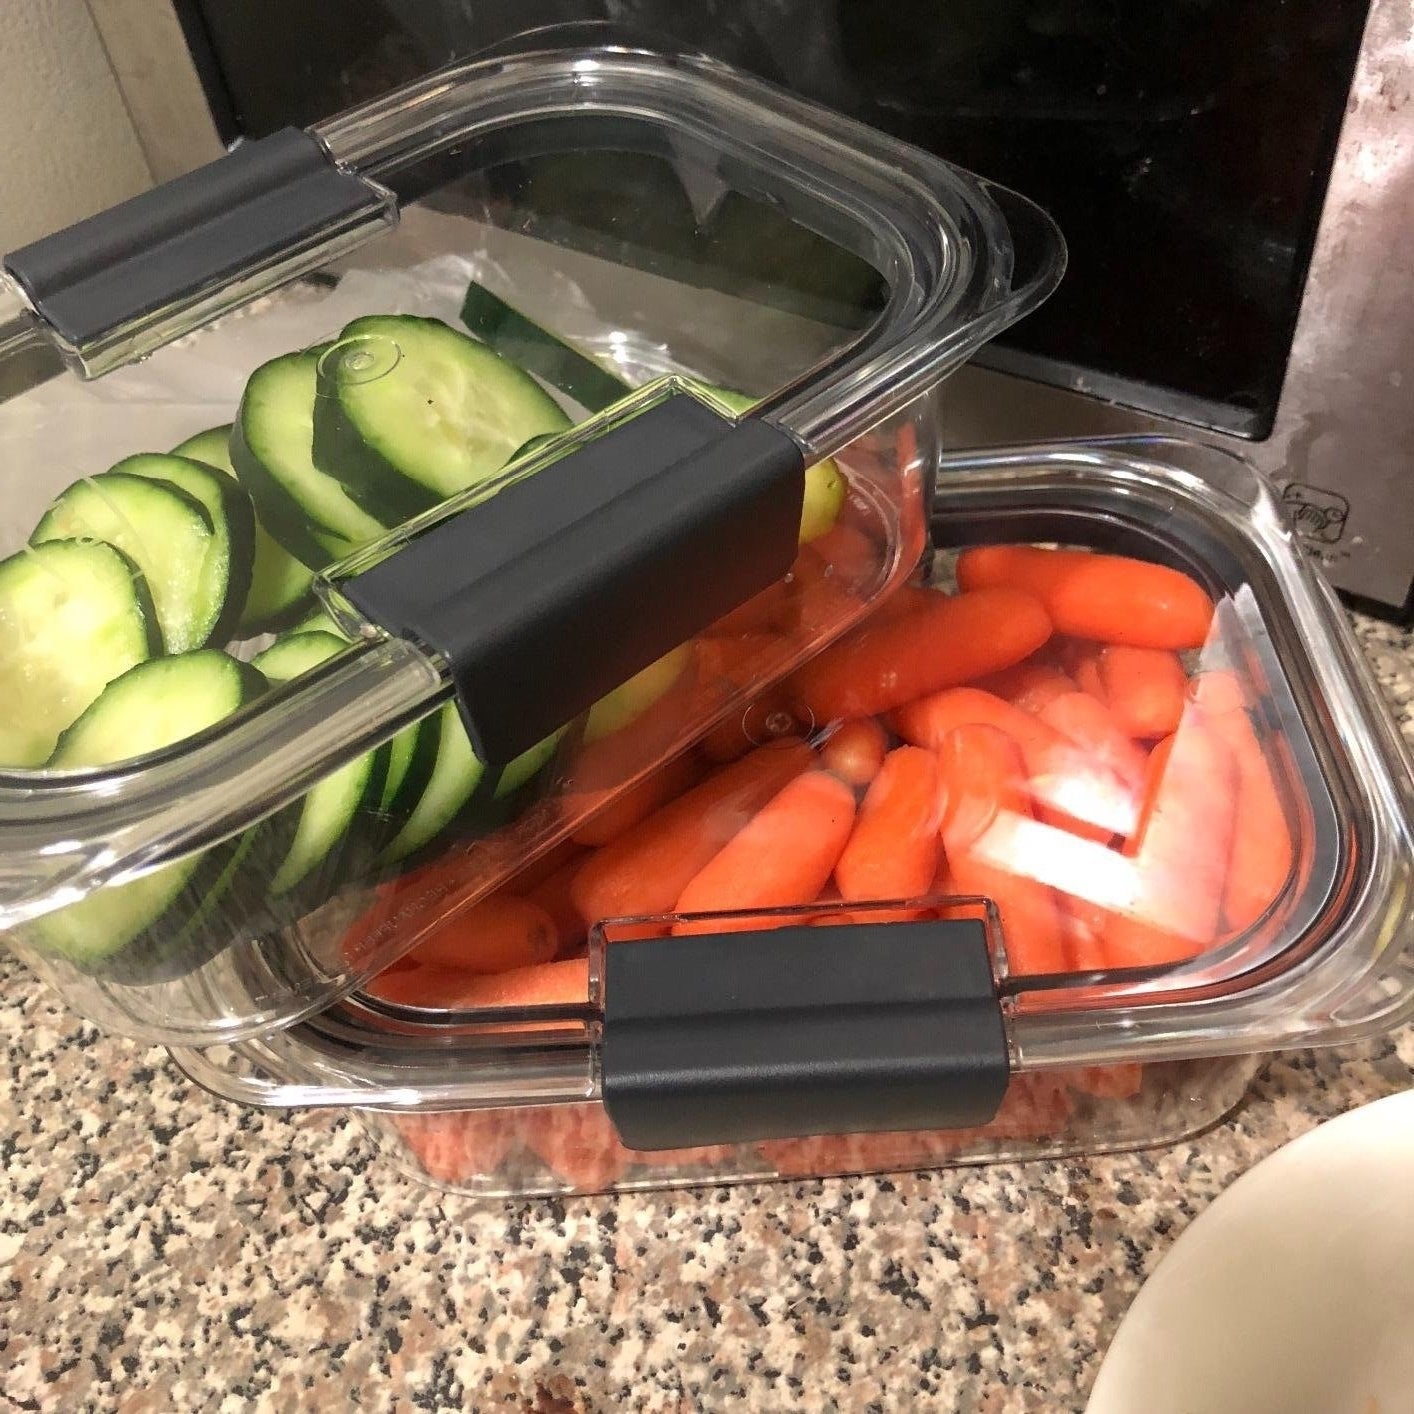 Rubbermaid Brilliance Glass Food Storage Containers Review